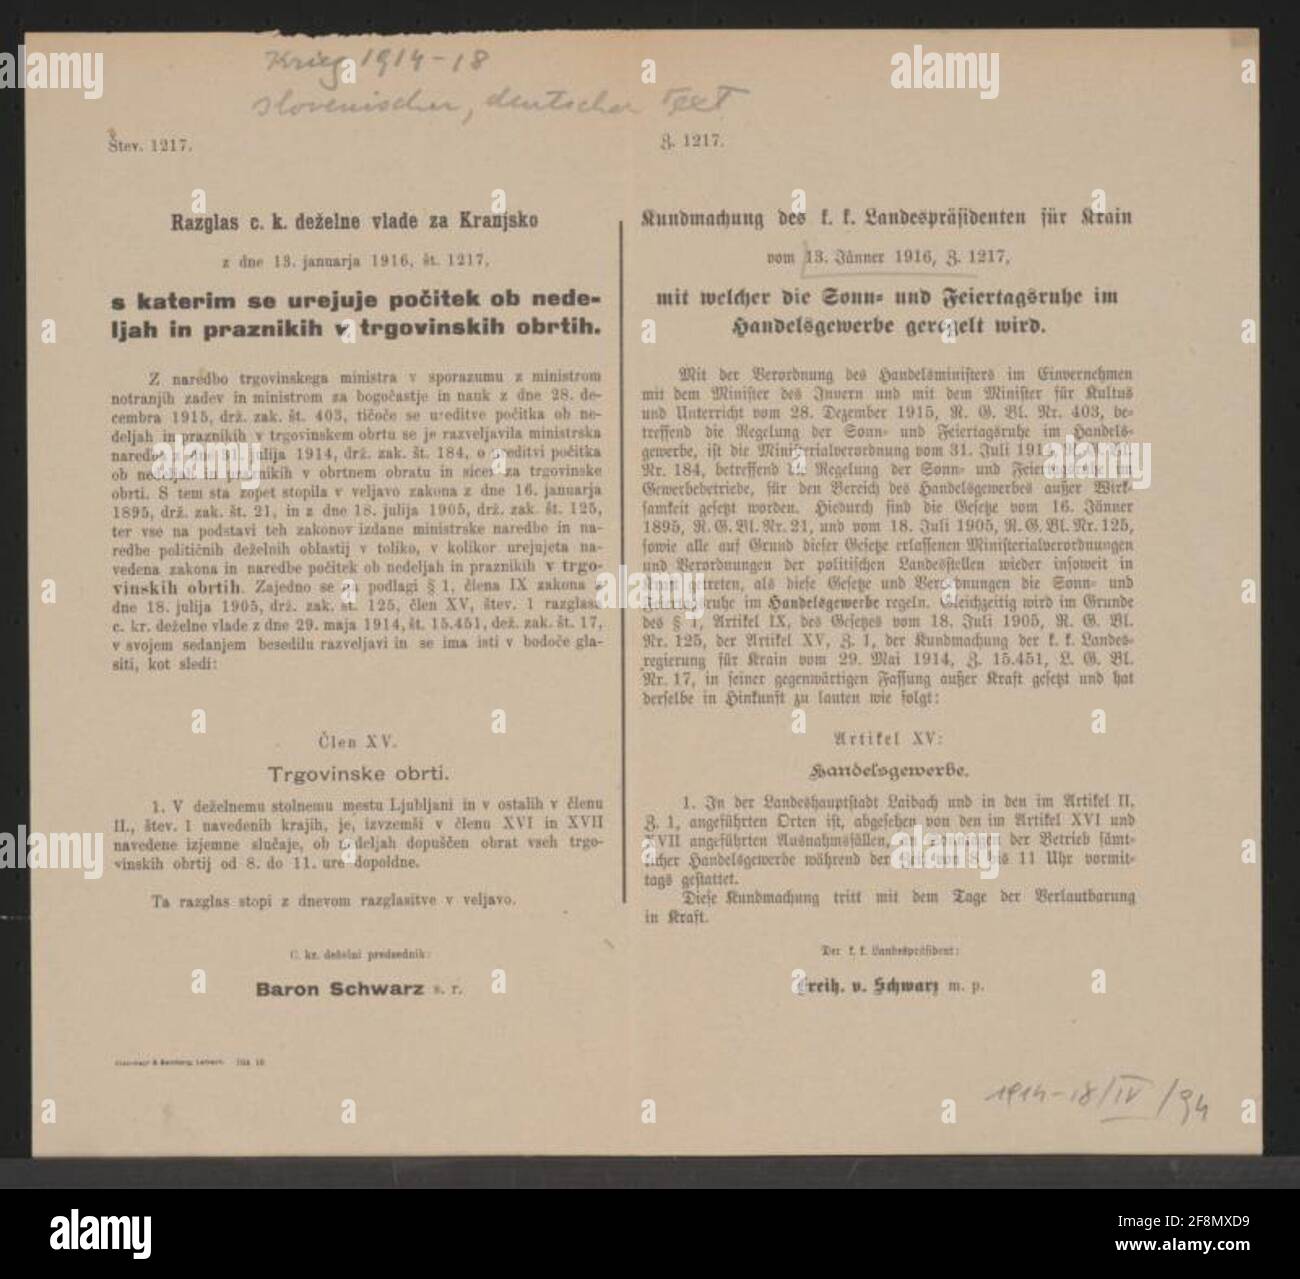 Sunday and holiday rest - announcement - Laibach - Multilingual poster Control of Sundays and public holidays in the trading industry - Permitted from 8 to 11 o'clock in the morning - the K.K. President Freiherr von Schwarz 13 January 1916, Z. 1217 Stock Photo